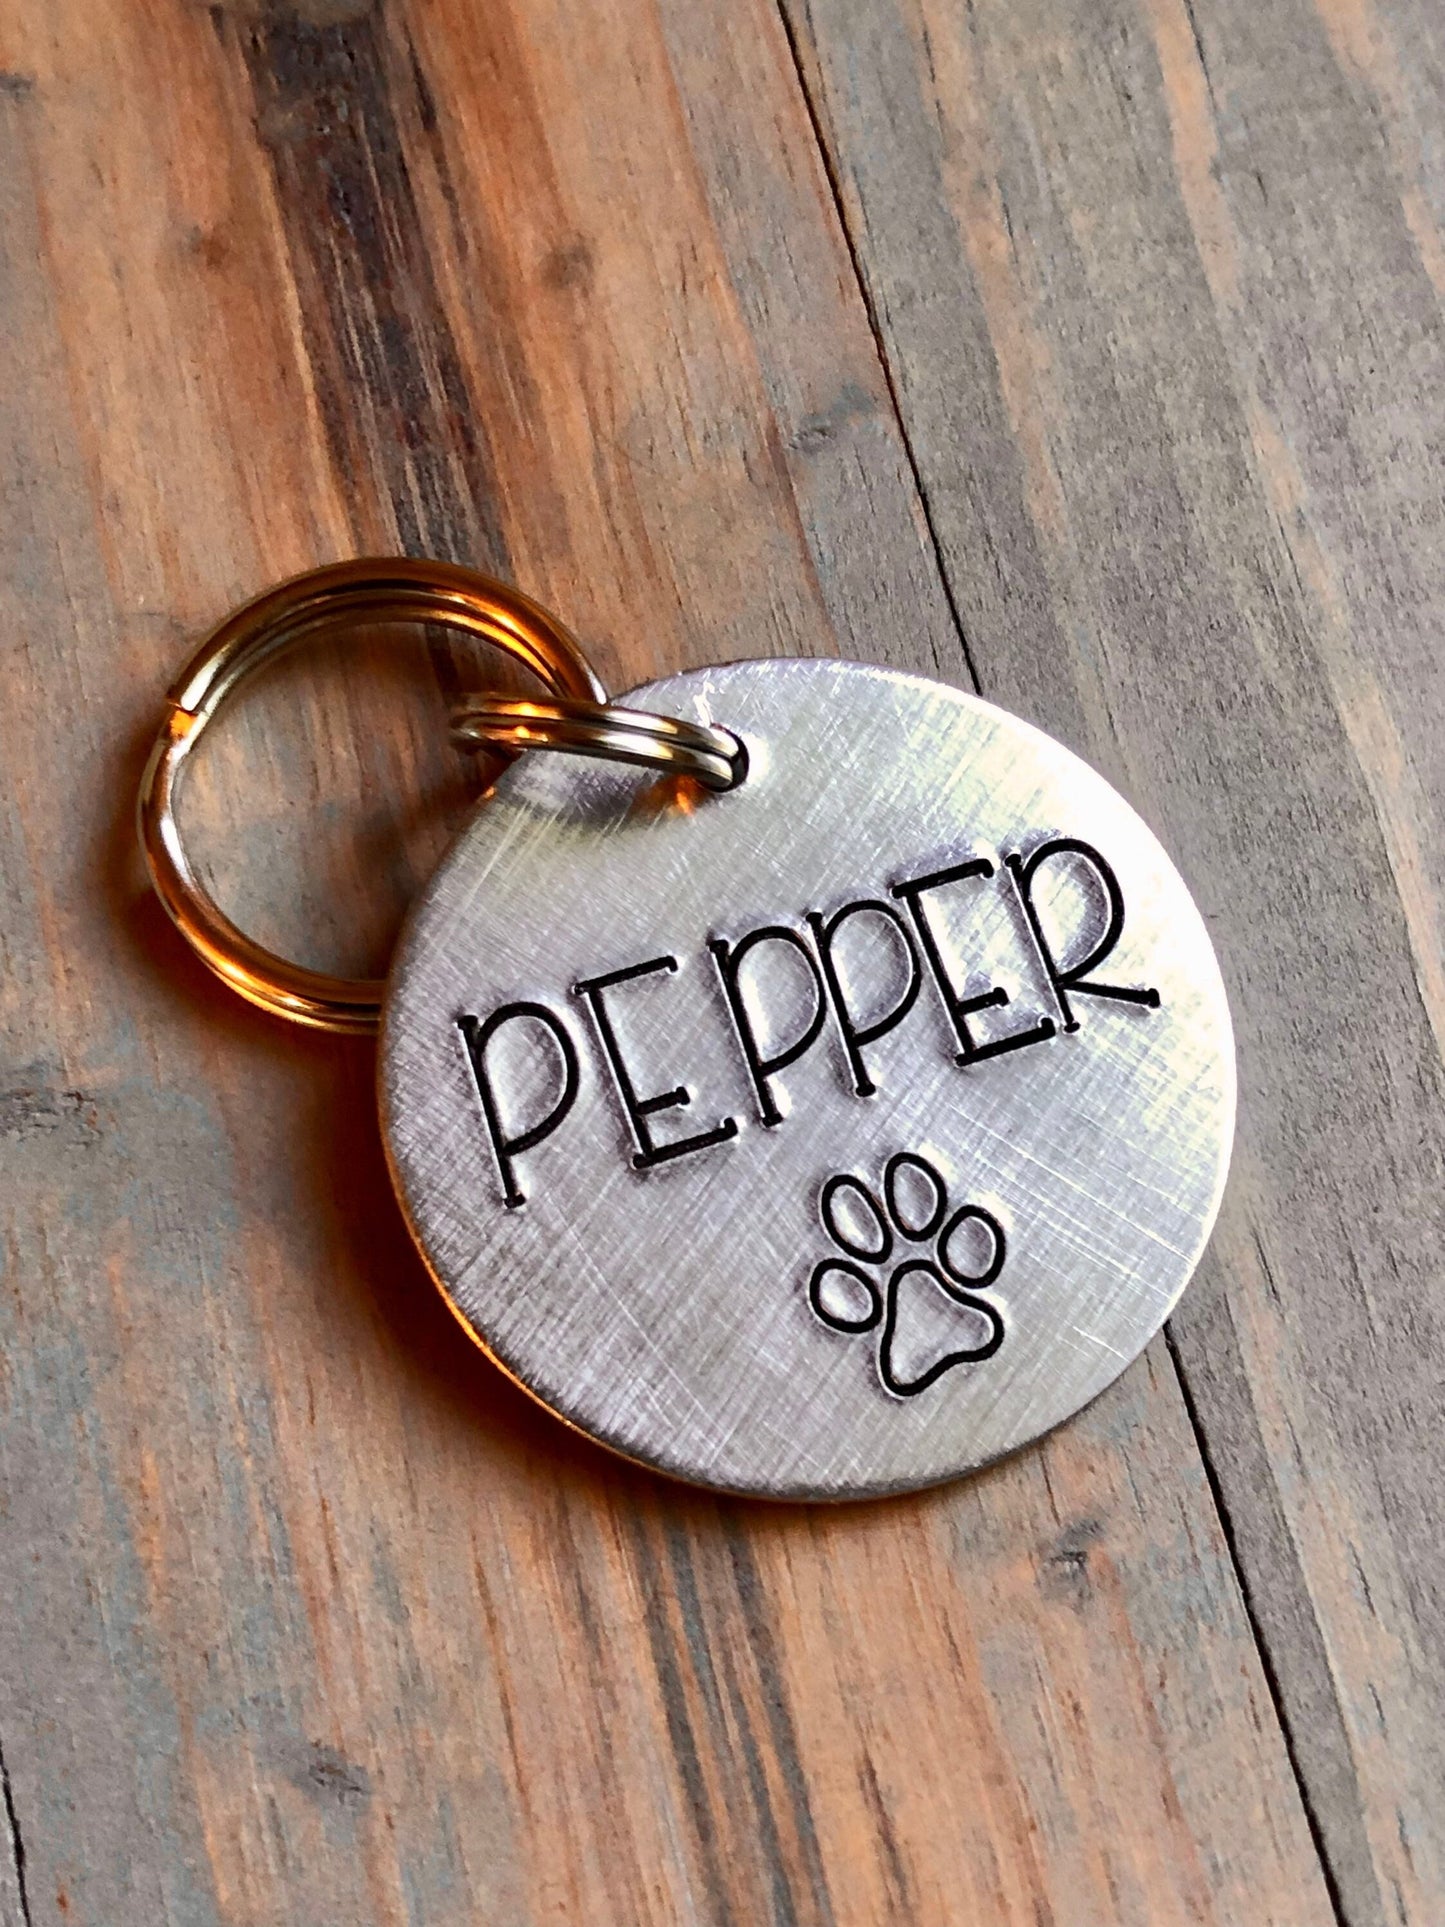 Hand Stamped Dog ID Tag, Pet Id Tag, Tag for Dog, Puppy Tag, Tag with Paw Print, Large Dog Tag, Pet ID, Identification Tag